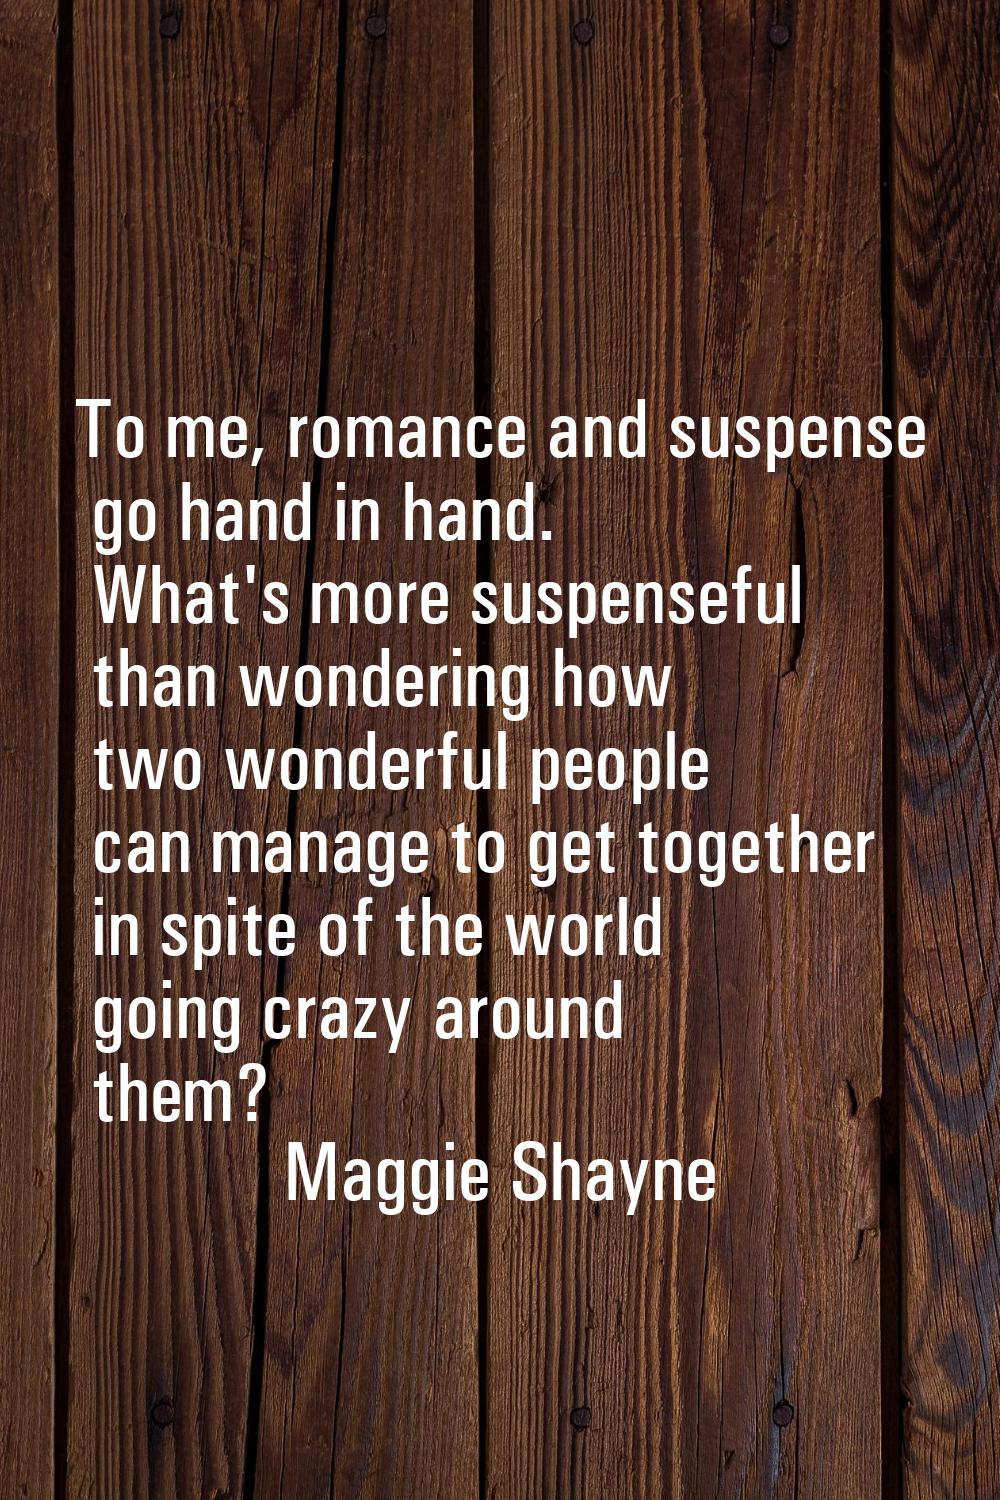 To me, romance and suspense go hand in hand. What's more suspenseful than wondering how two wonderf